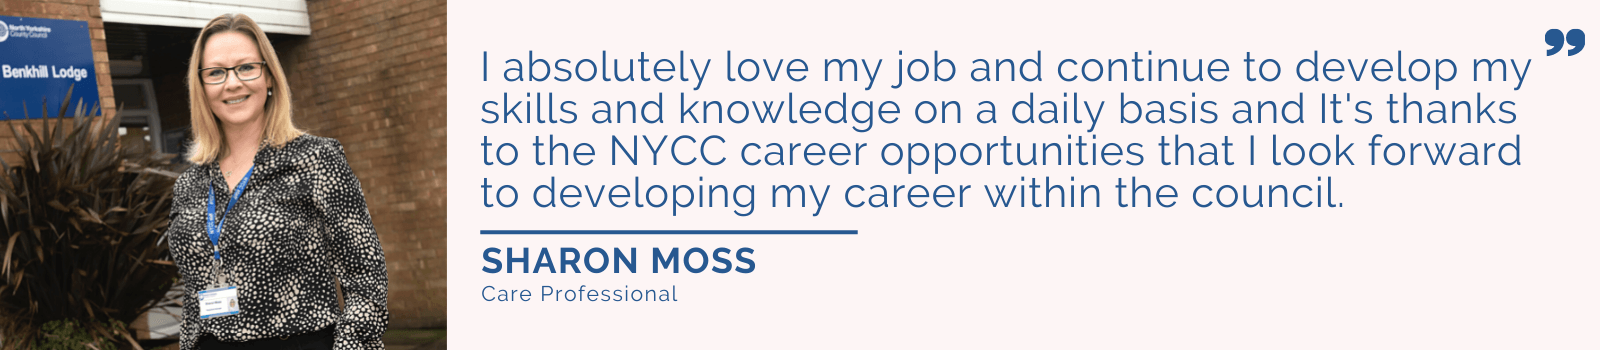 Quote from Sharon Moss.. "I absolutely love my job and continue to develop my skills and knowledge on a daily basis and it's thanks to the NYCC career opportunities that I look forward to developing my career within the council".